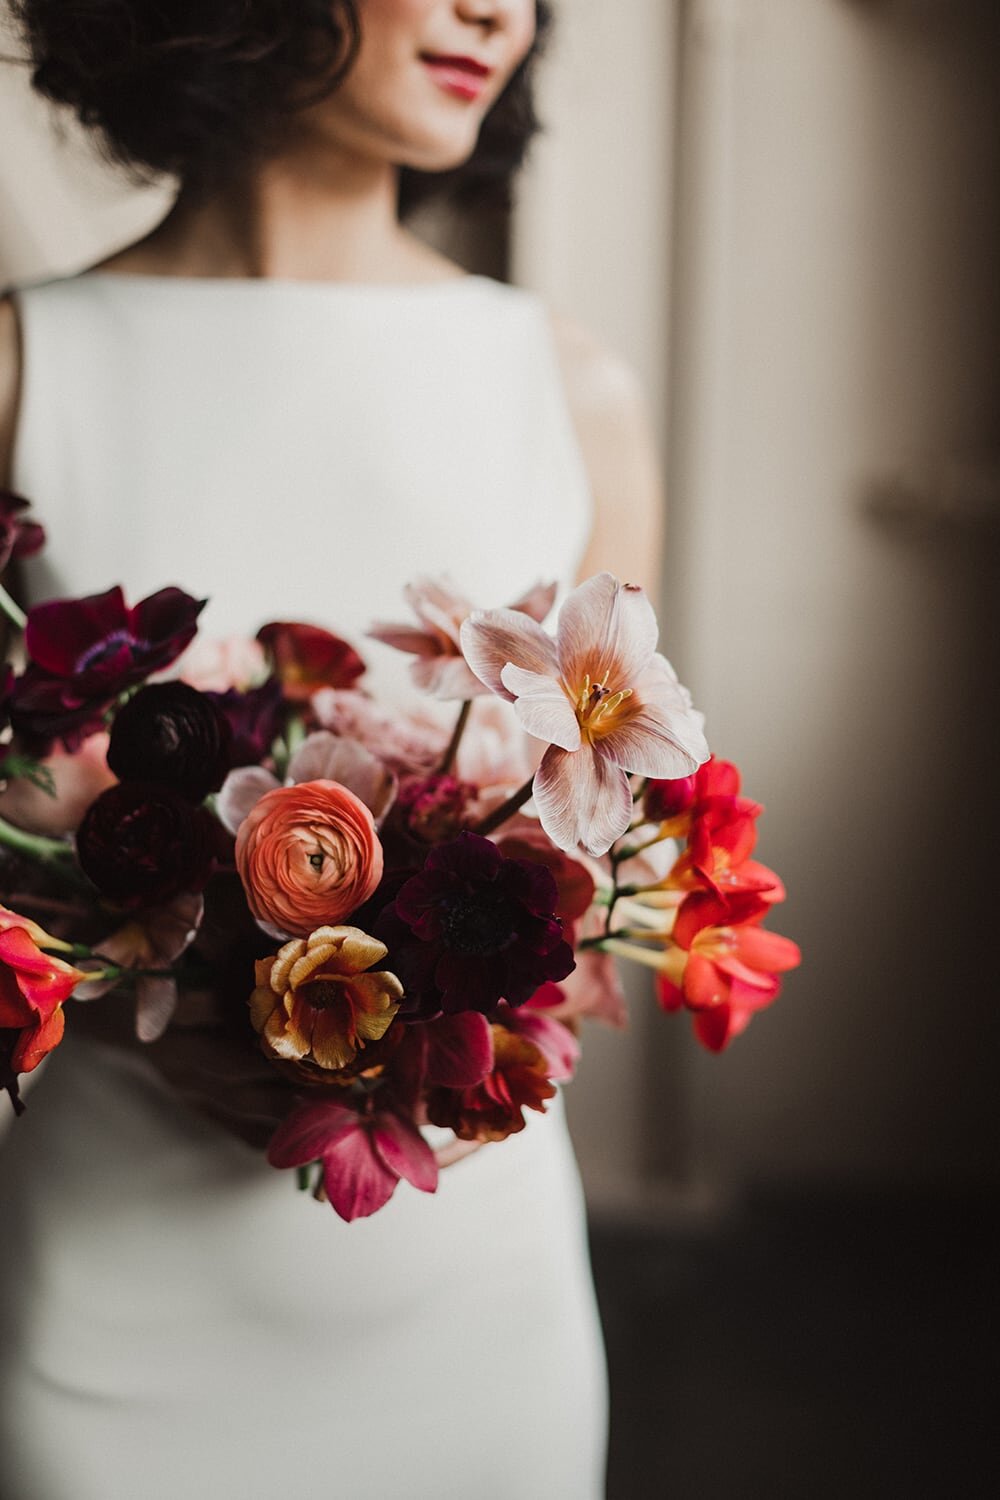 Bridal Bouquet created from Local Blooms PDX